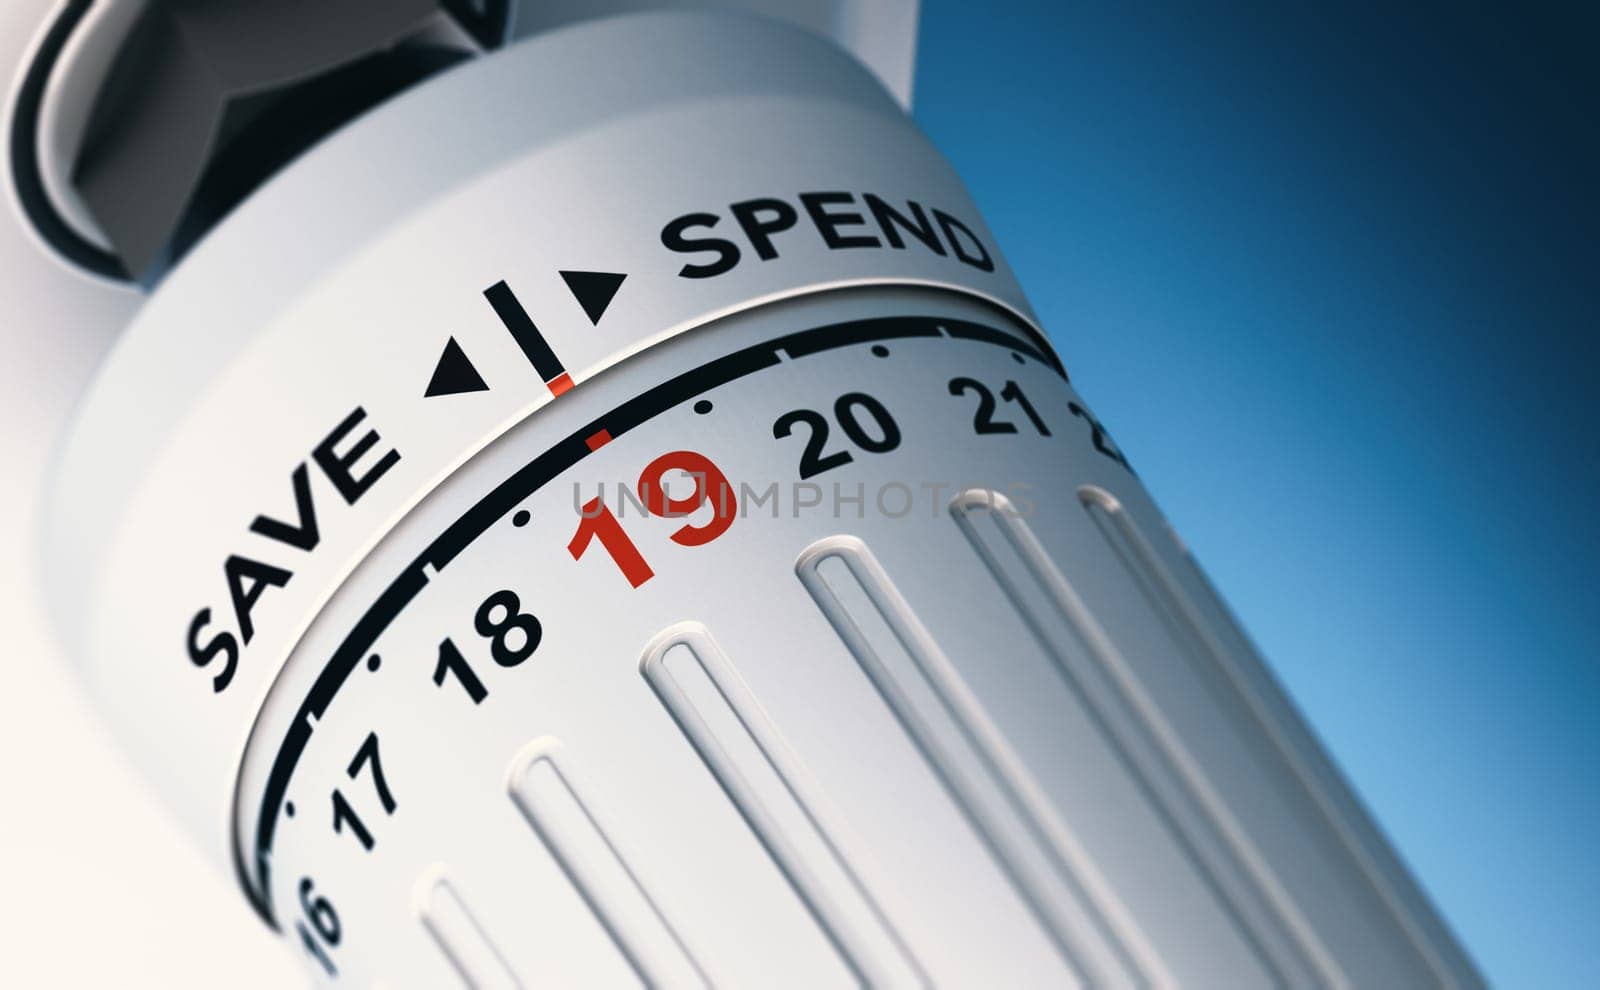 Close up of a thermostat set on 19 degrees with the the words save and spend. Concept of saving or spending money by controlling temperature. 3D illustration.